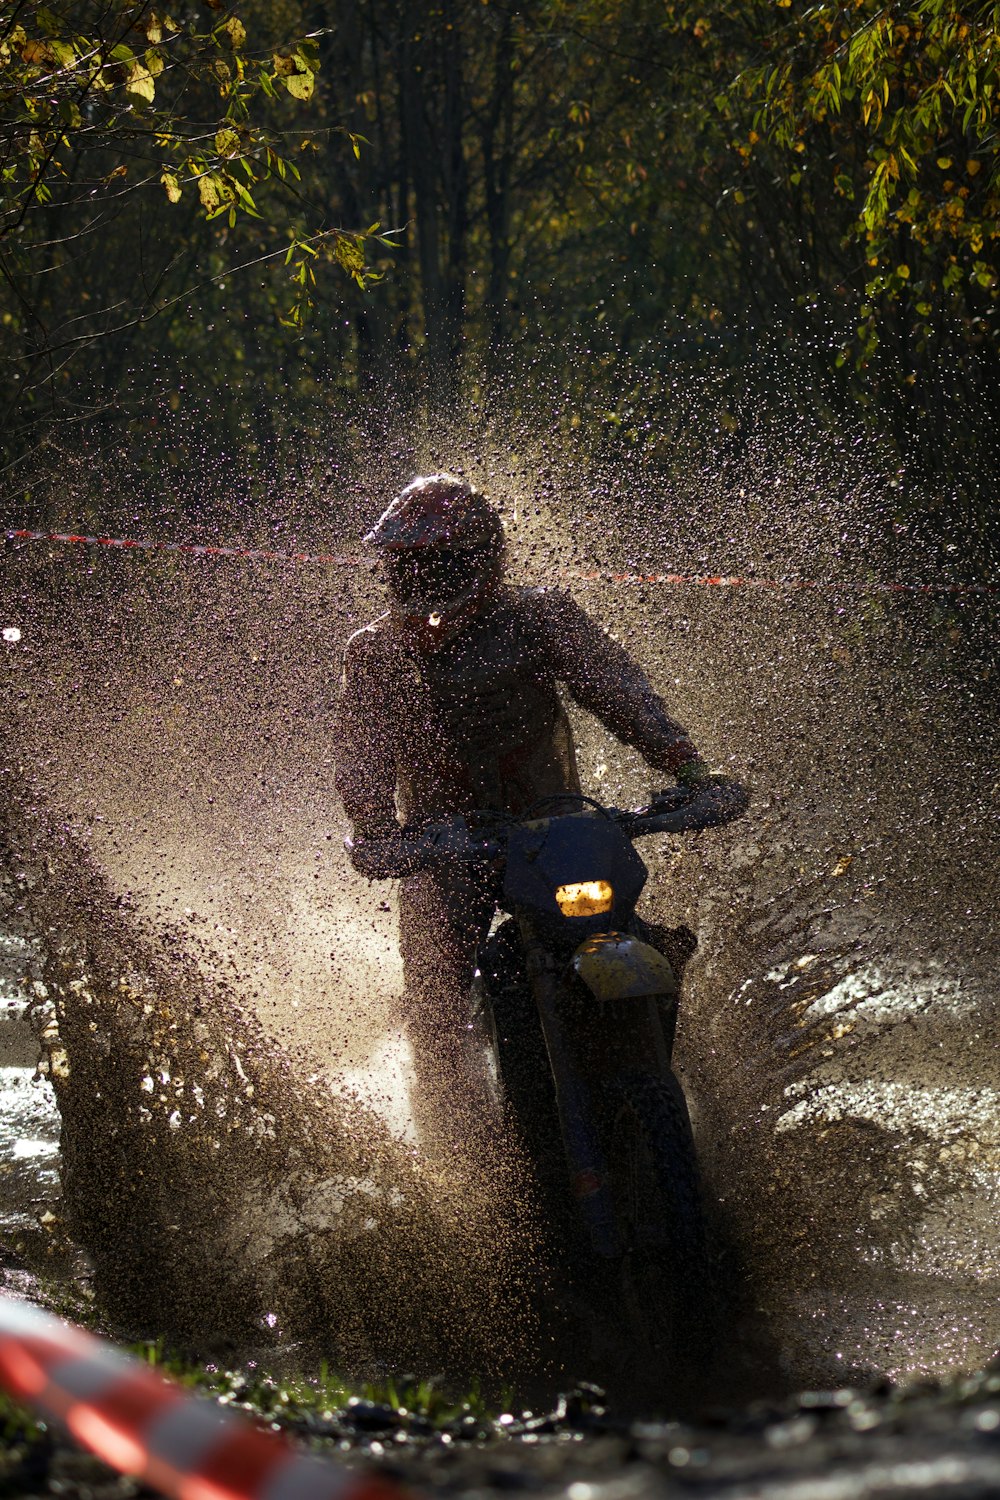 a person riding a motorcycle in the rain